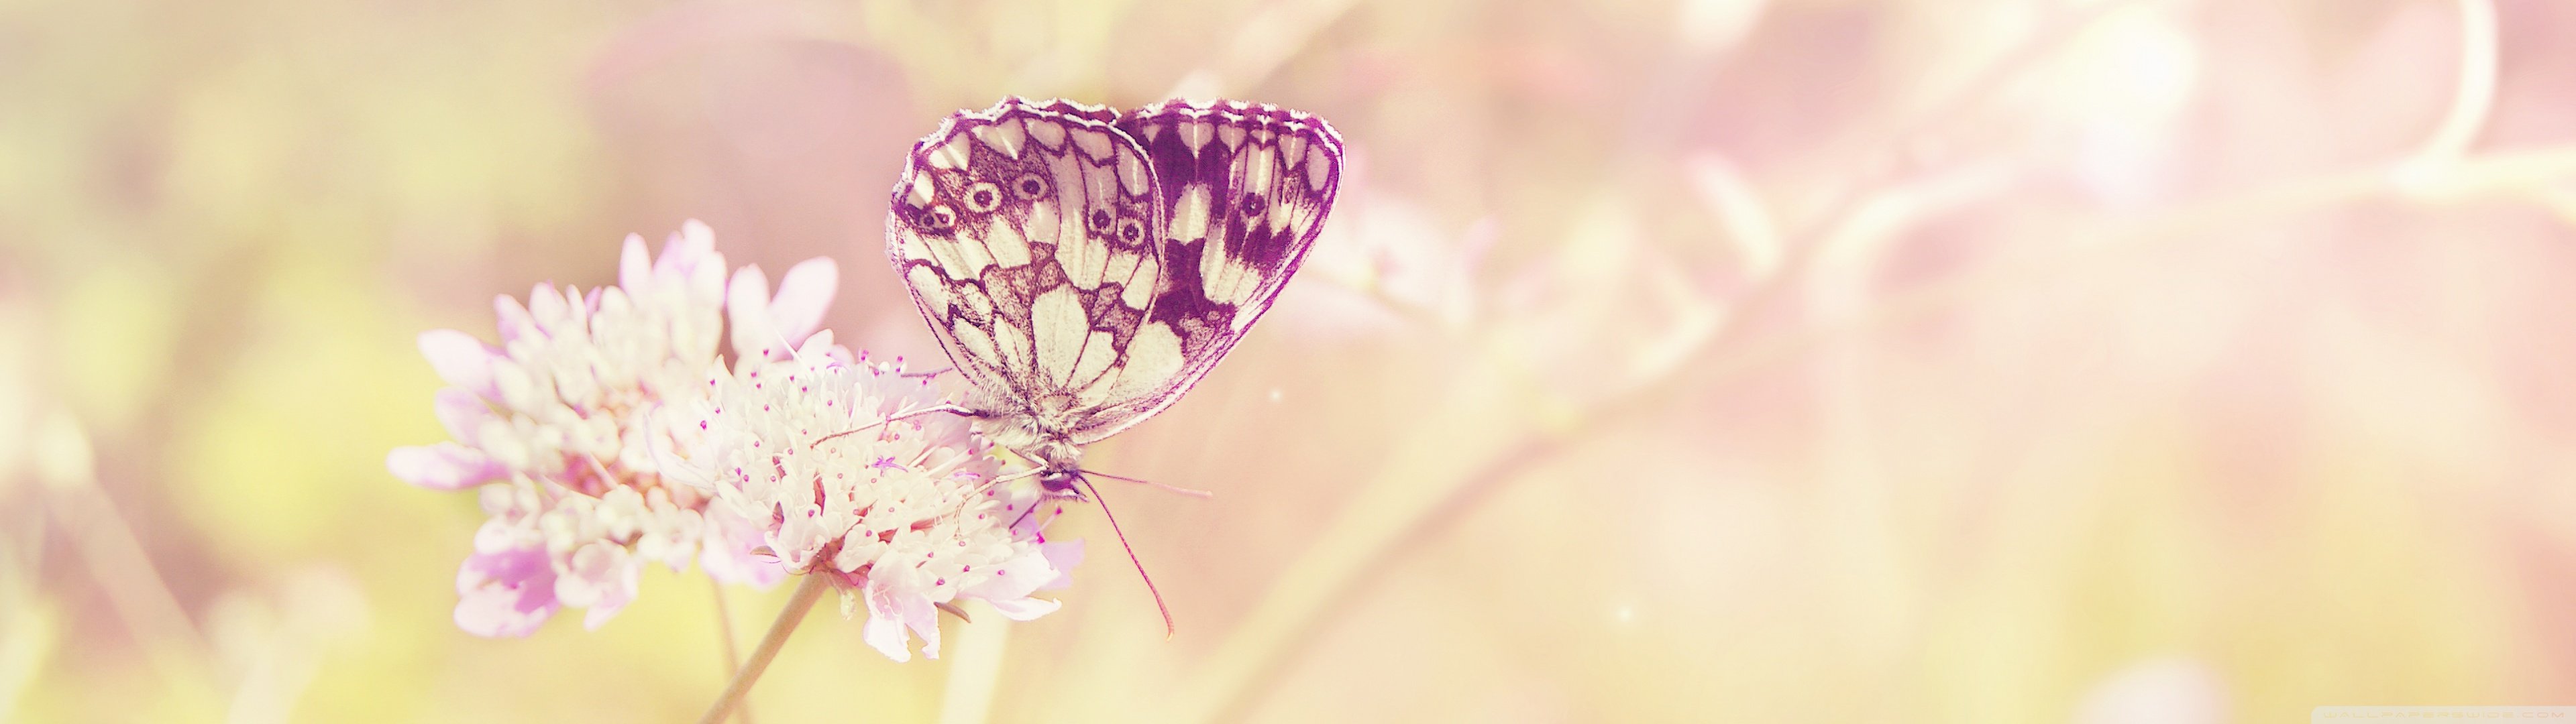 dual, Monitor, Screen, Multi, Multiple, Butterfly, Papillon, Nature, Insect, Insecte Wallpaper